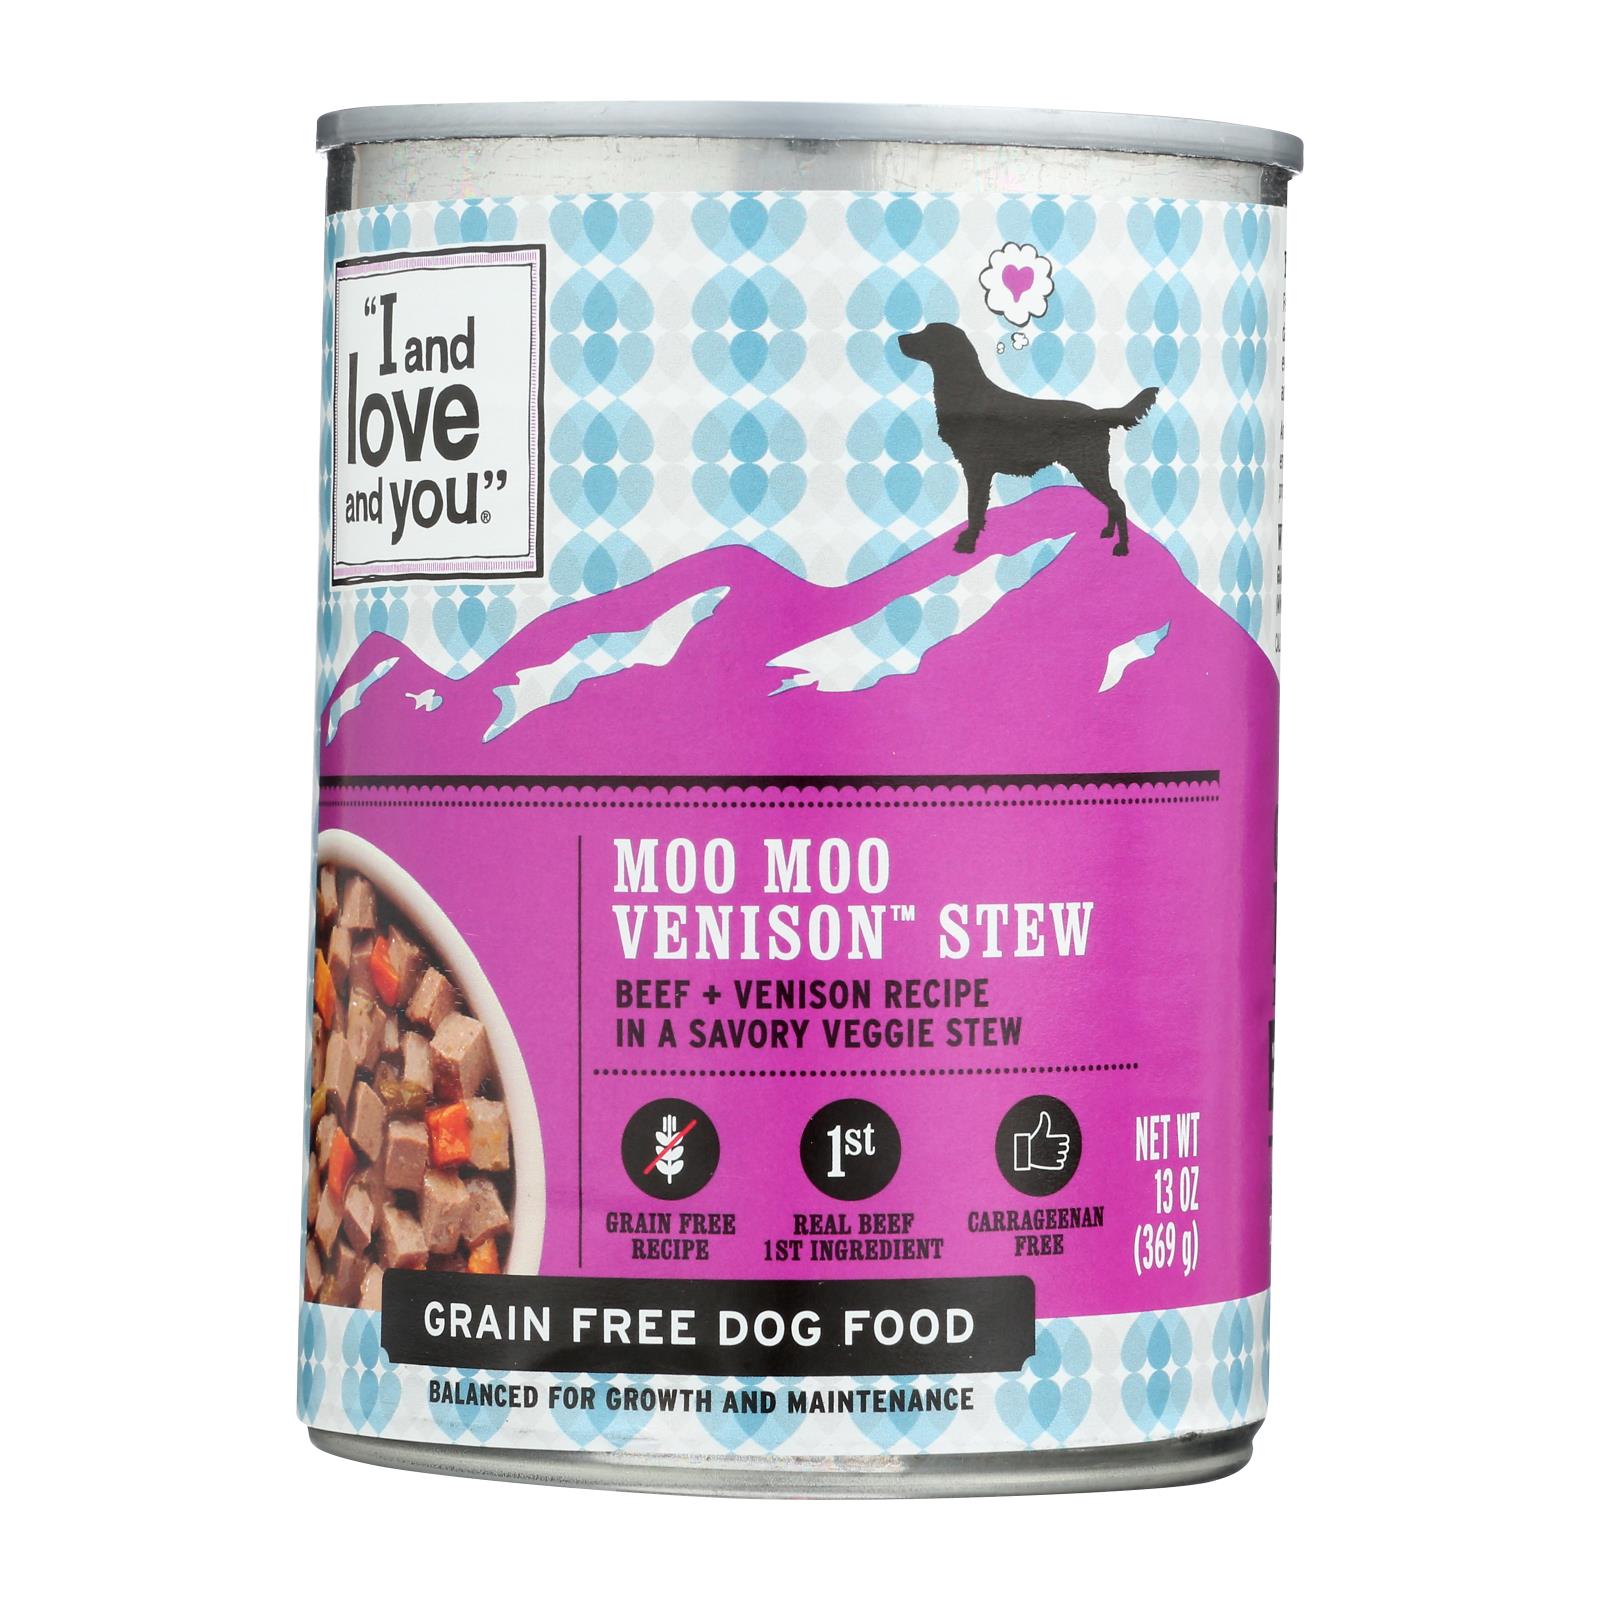 I And Love And You Dog Canned Food Moo Moo Venison Stew - 12개 묶음상품 - 13 OZ